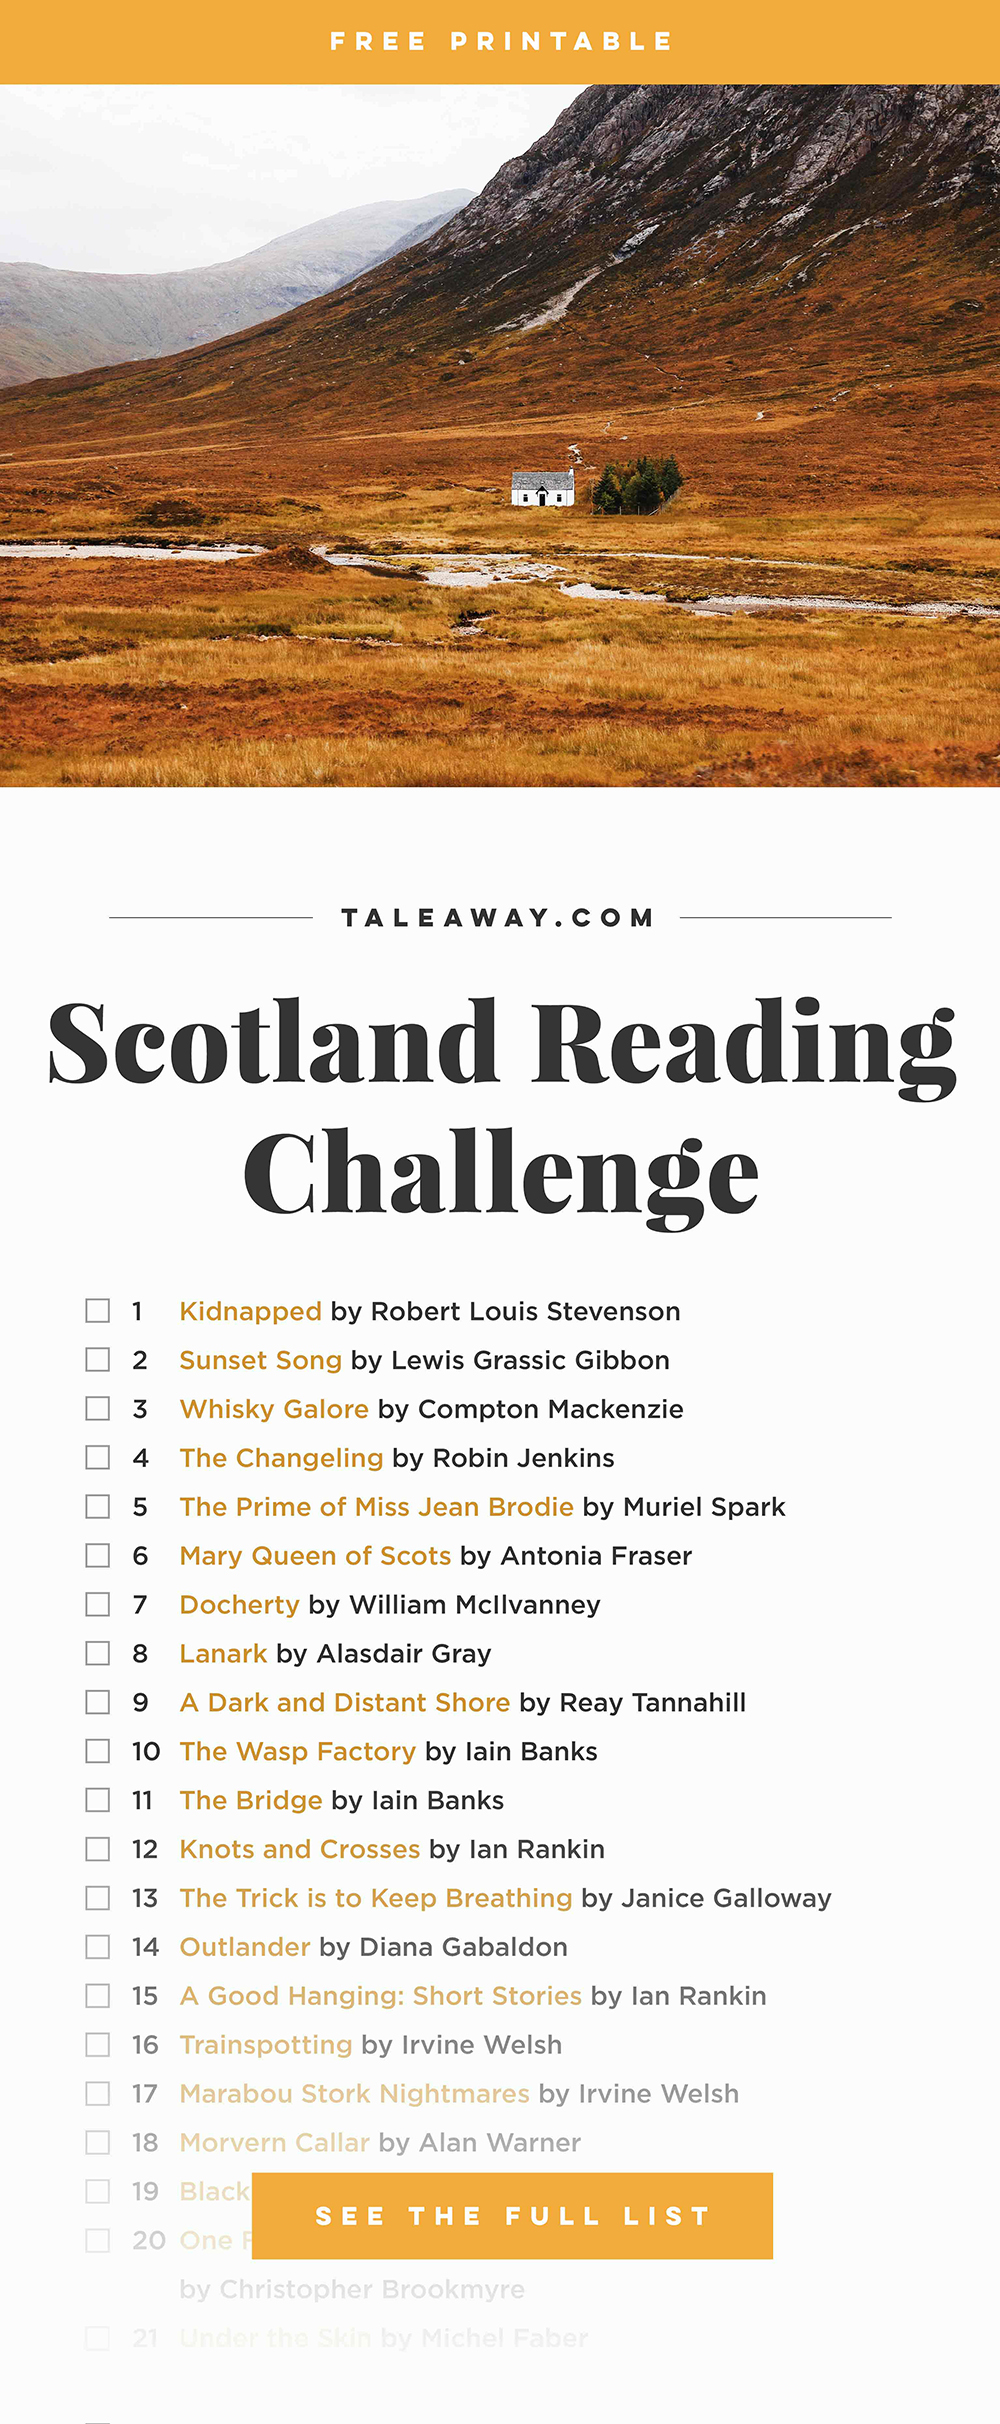 Scotland Reading Challenge, Books Set In Scotland - For more books visit www.taleway.com to find books set around the world. reading challenge, scottish books, book challenge, books you must read, books from around the world, world books, books and travel, travel reading list, reading list, books around the world, books to read, scotland books, scotland books novels, scotland travel